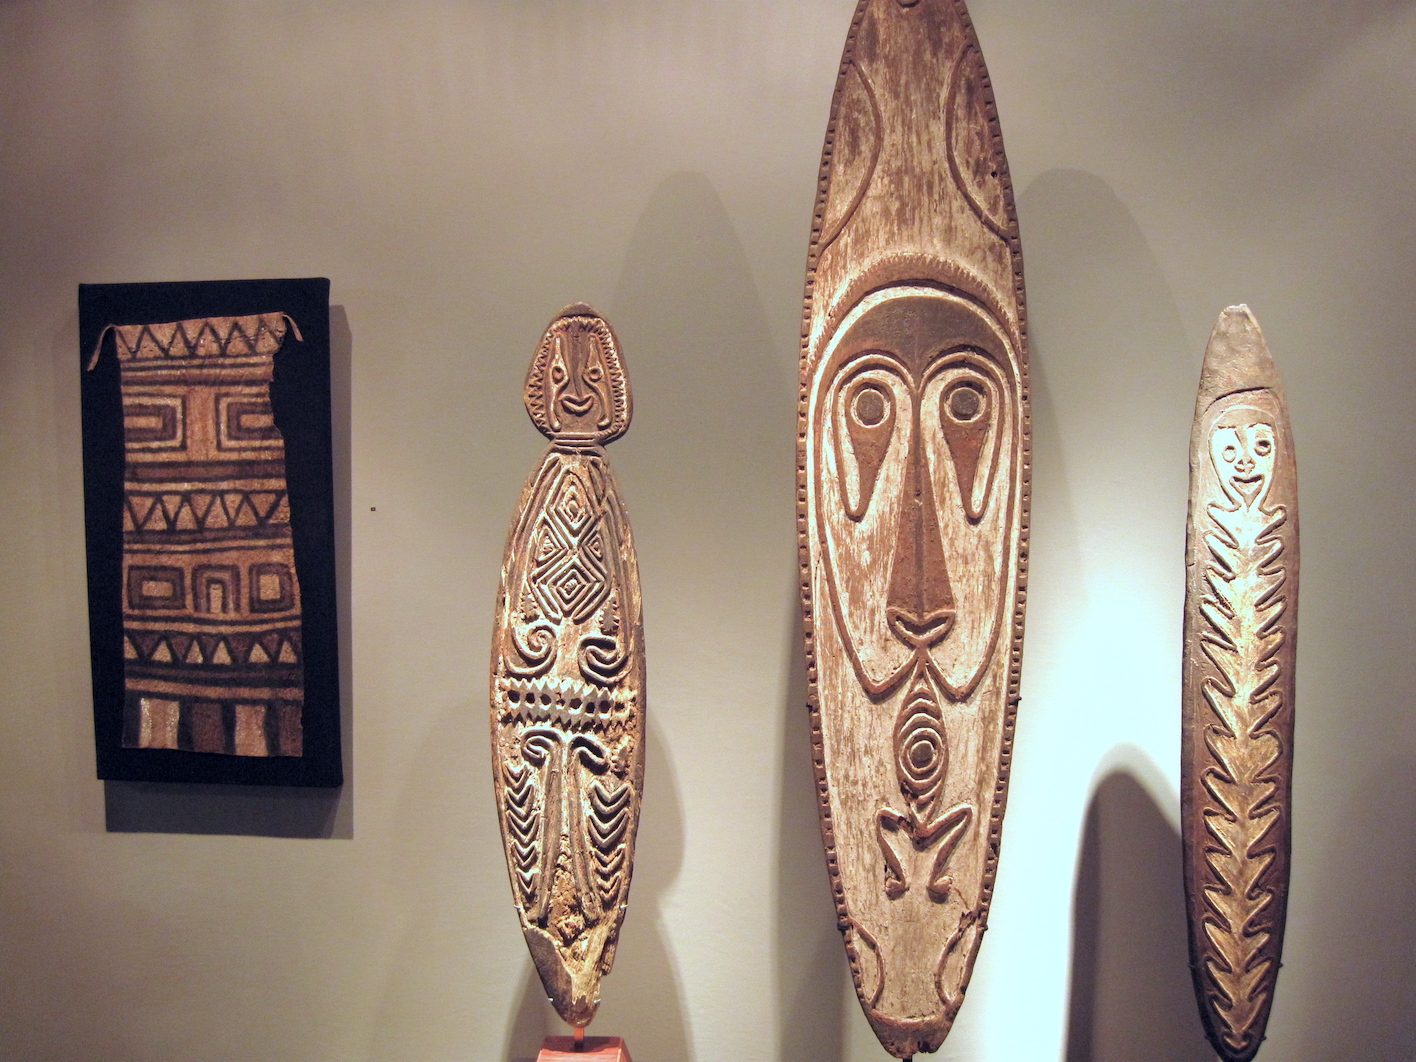 08-PAST-EXHIBITIONS-San-Francisco-Loft-Gallery-2010-Art-of-the-Papuan-Gulf-8